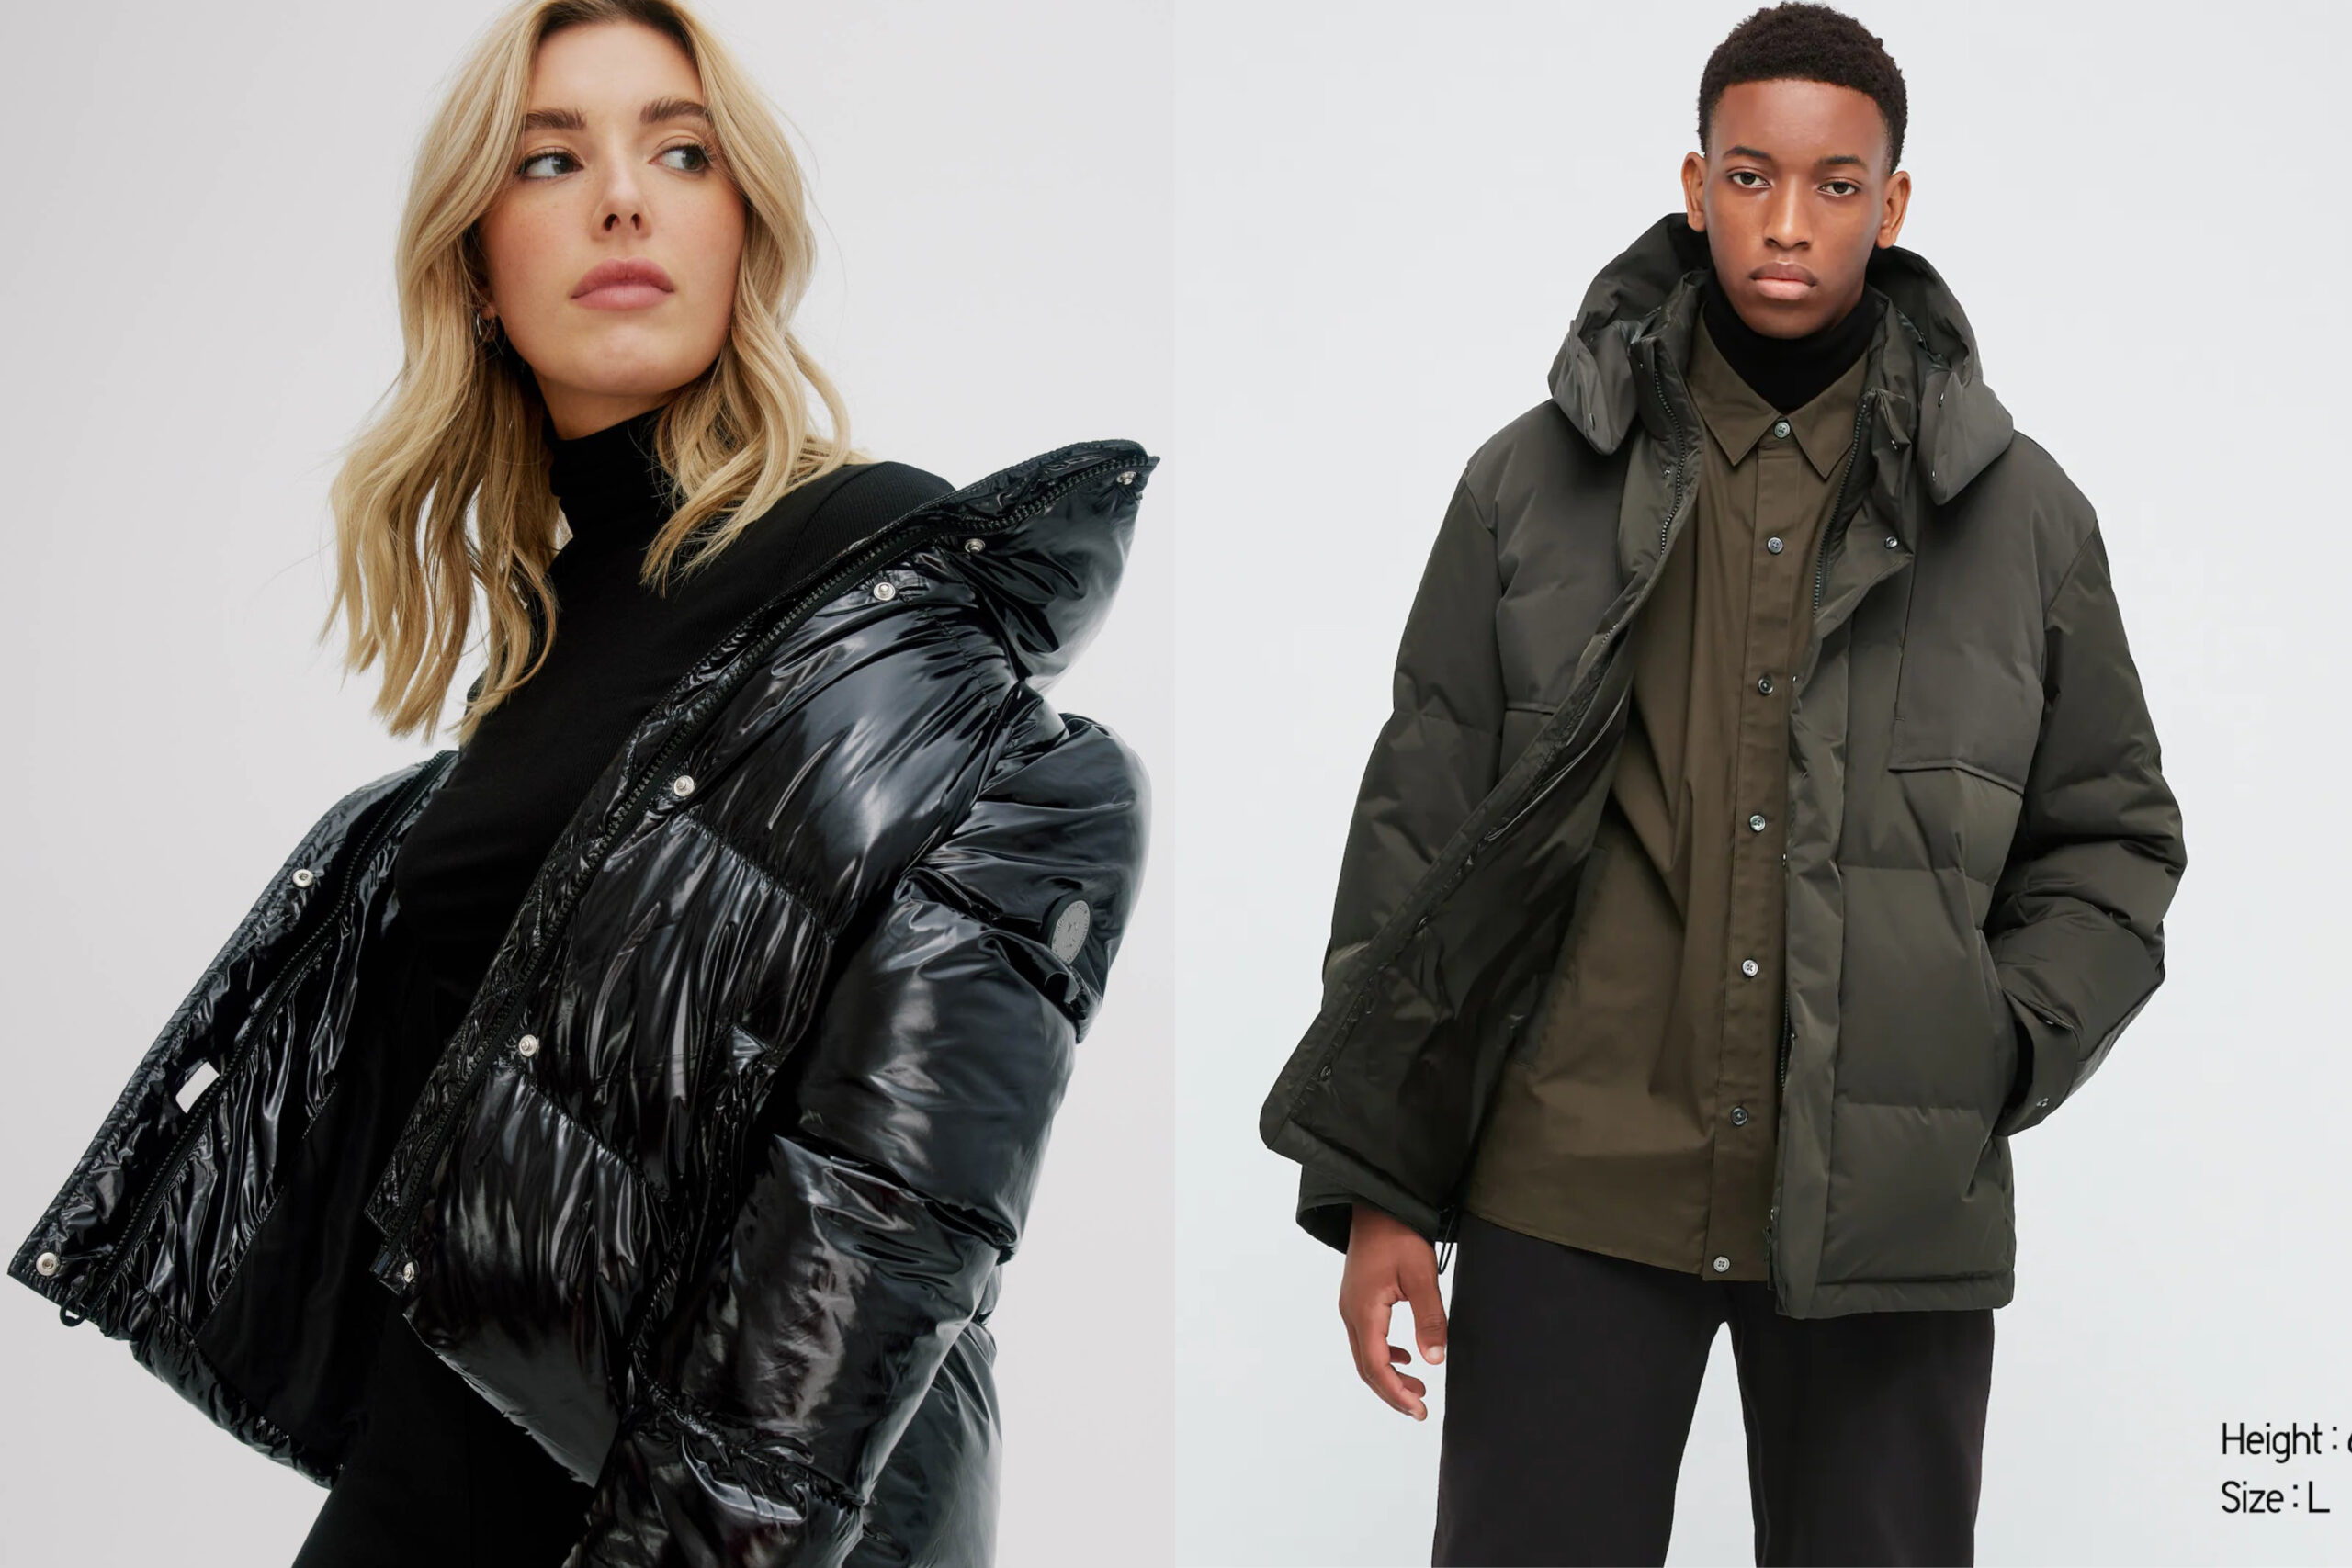 The Puffer Jackets – Trendy Jackets for Men and Women